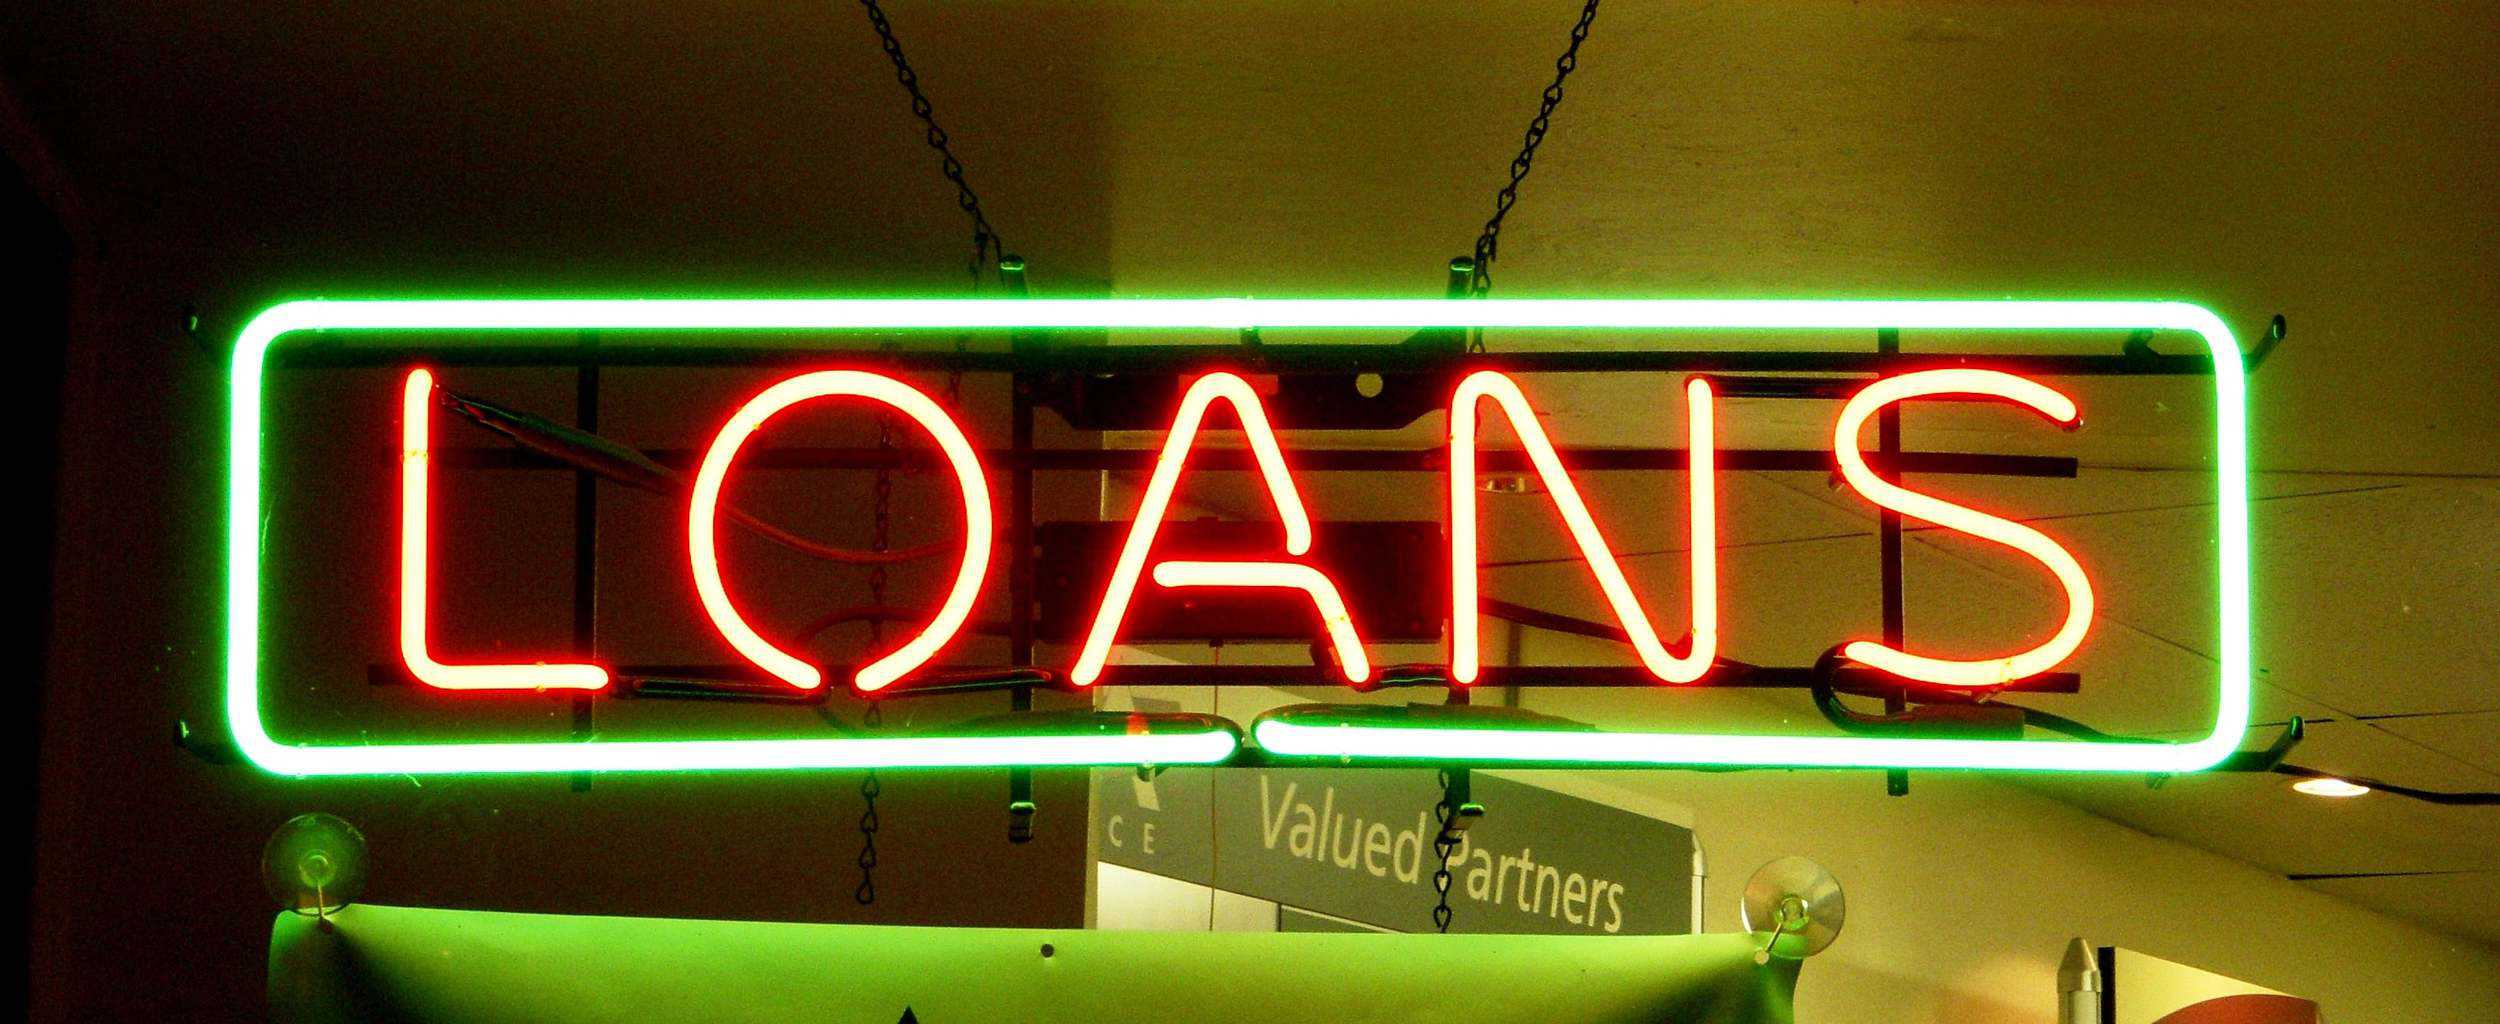 Locals Trust Phoenix Title Loans for the Loans they need